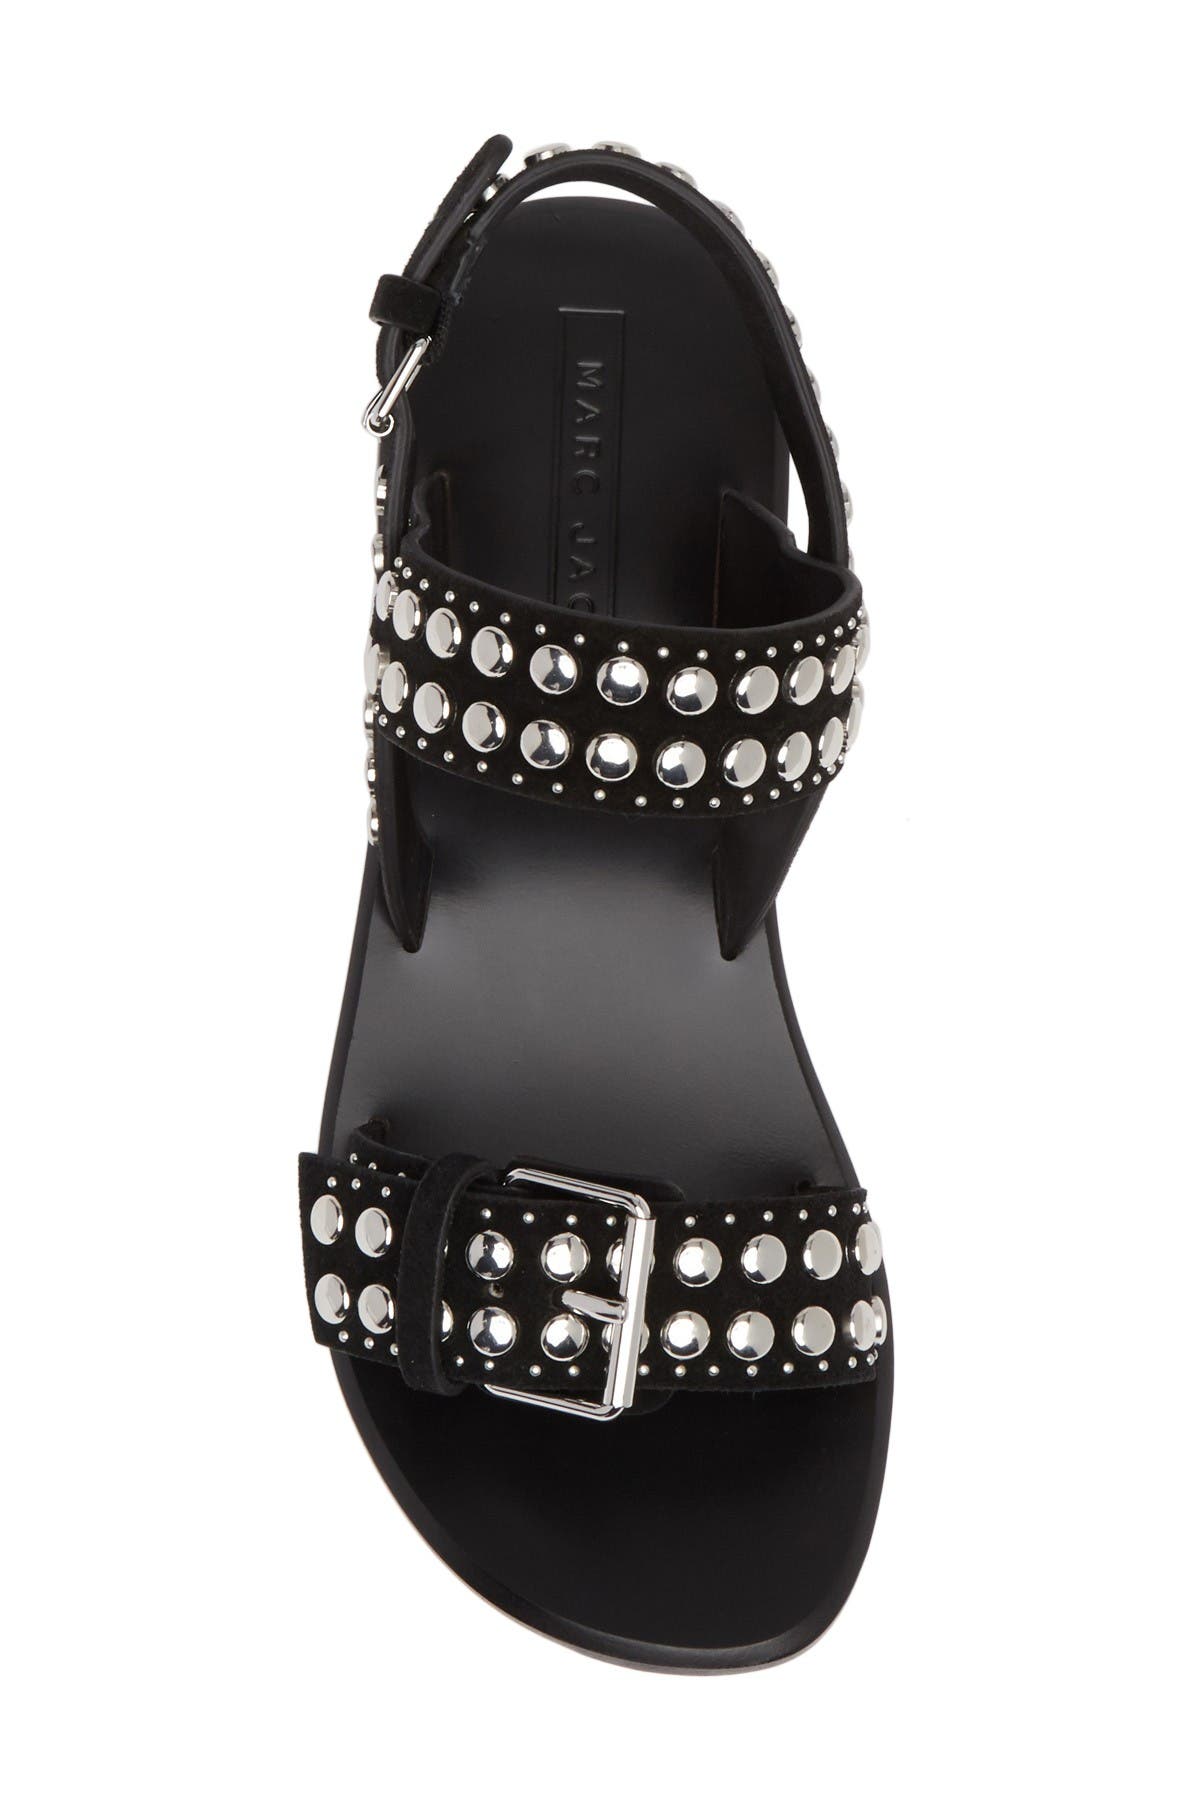 marc jacobs studded sandals